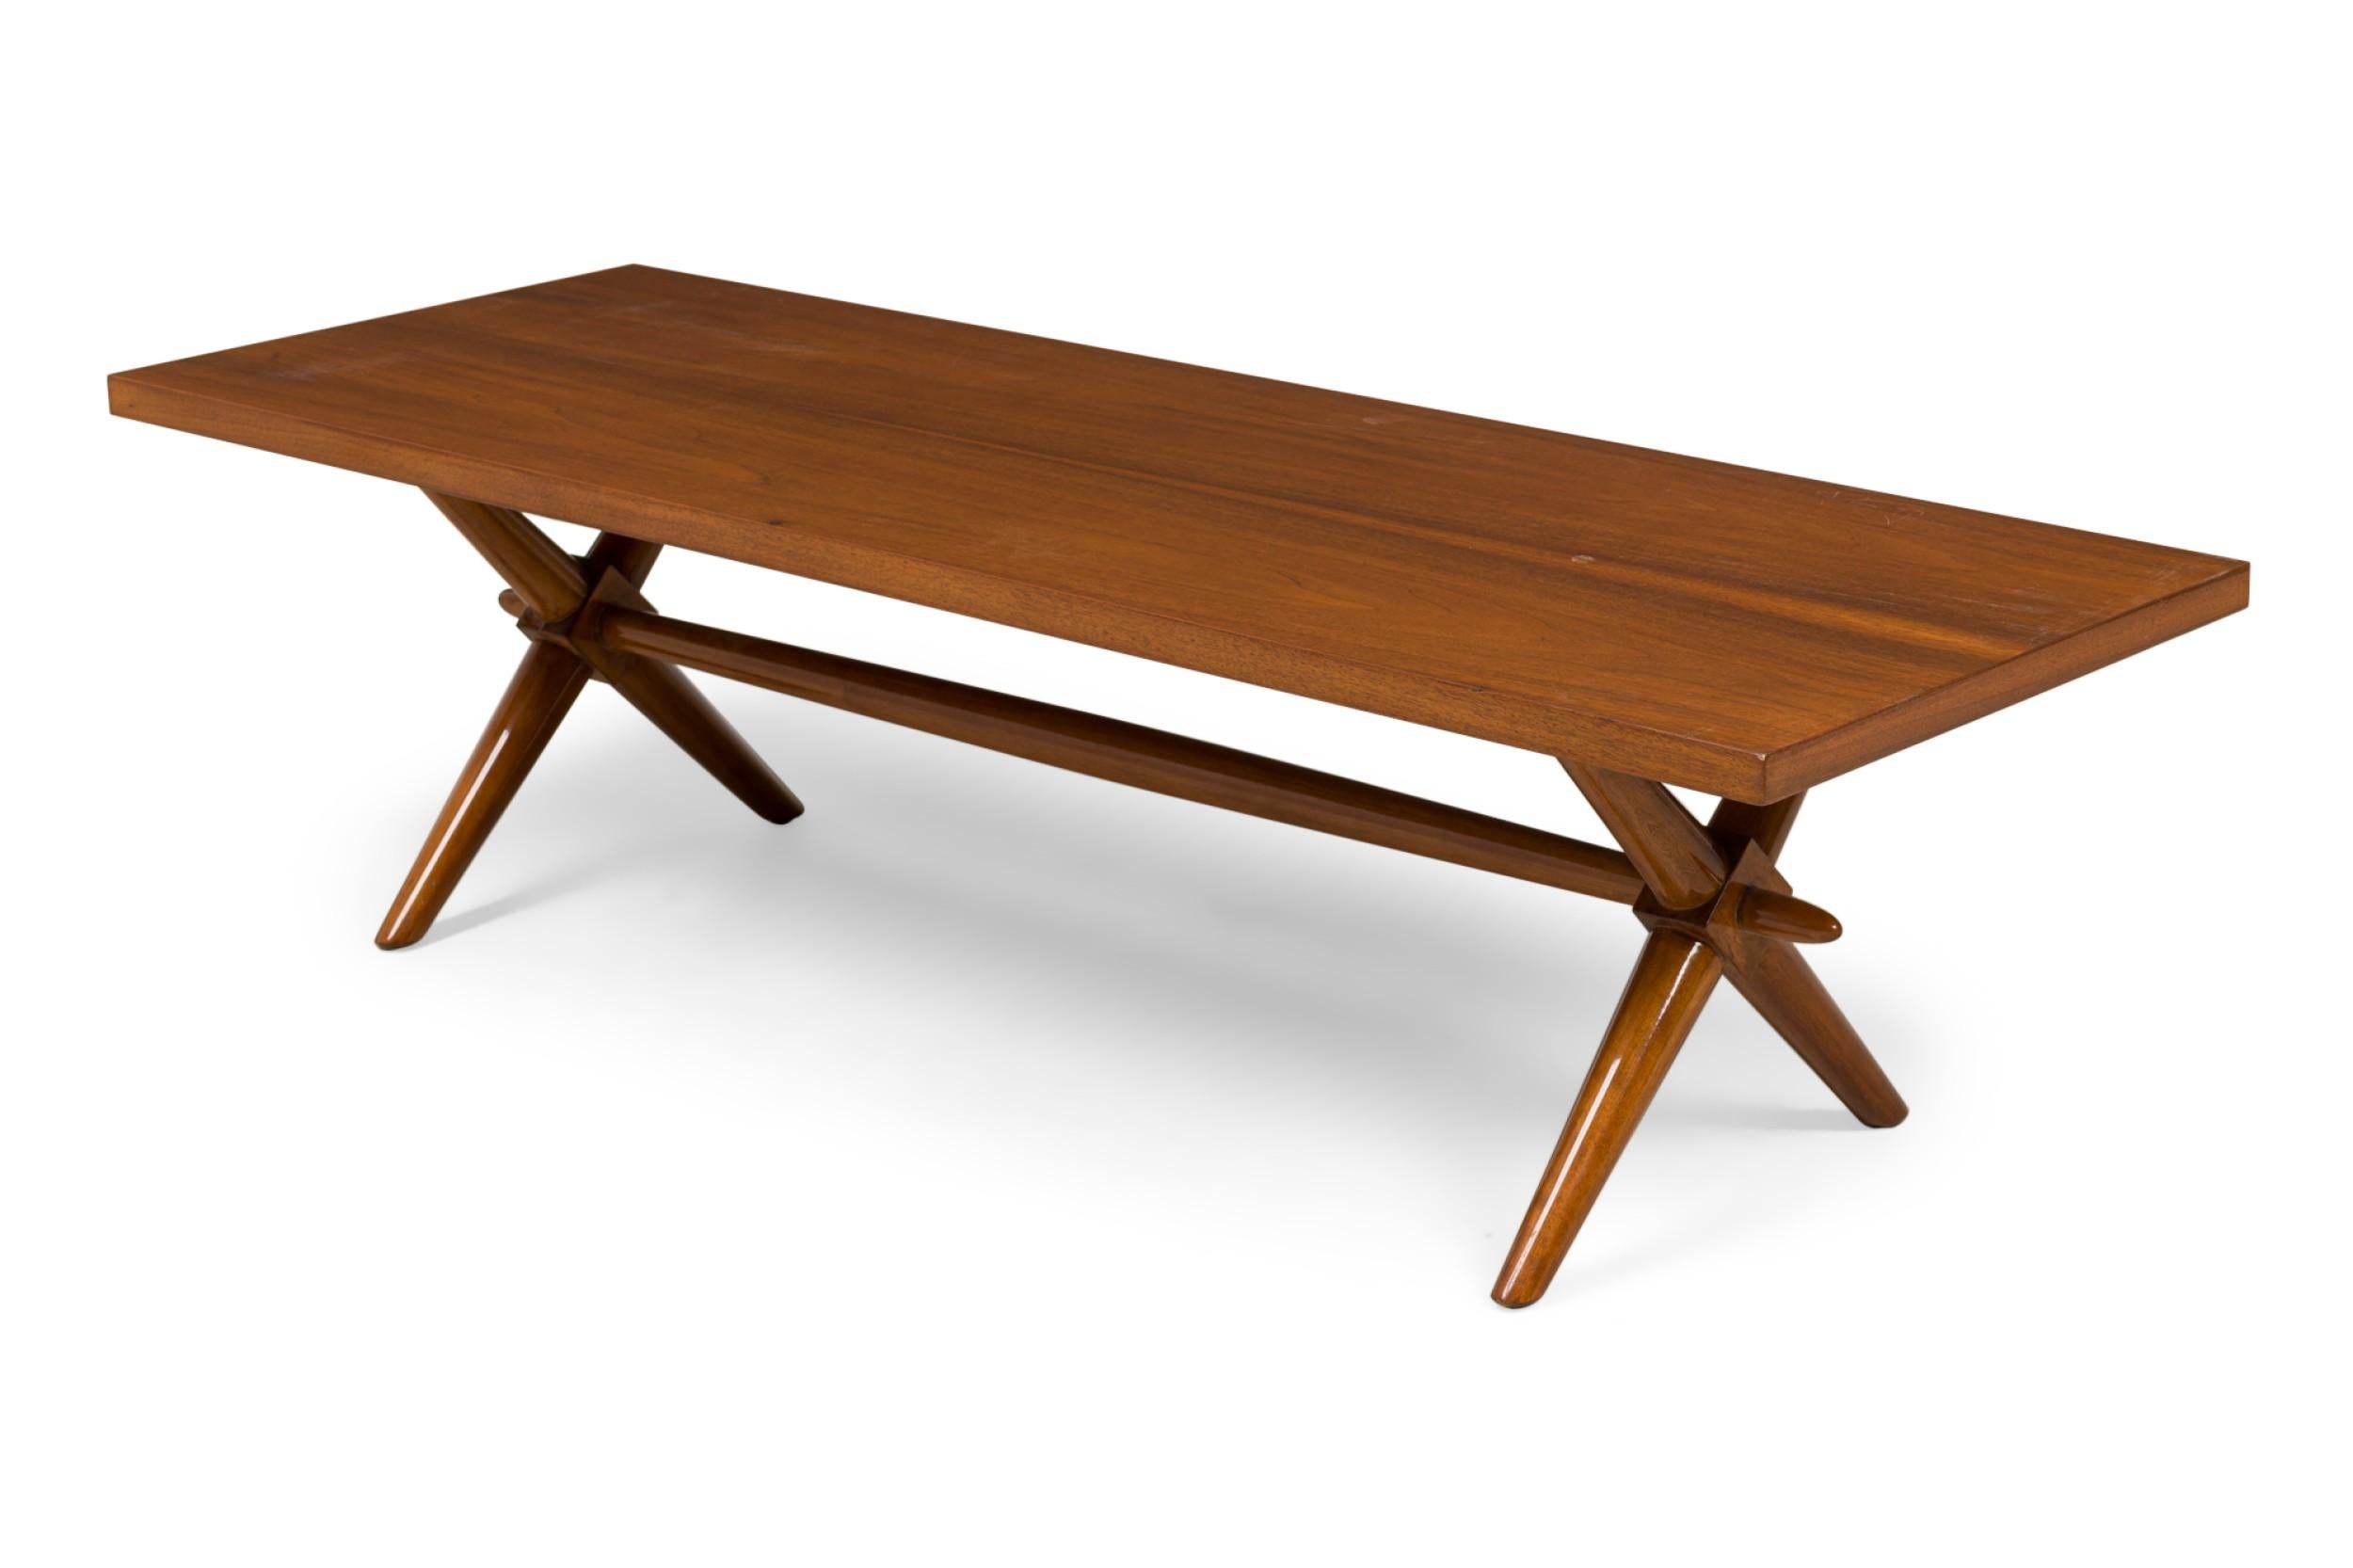 Mid-Century American Modern walnut low coffee table featuring a rectangular top over an X-form base composed of sculptural, tapering legs and stretcher. (T.H. ROBSJOHN-GIBBINGS)
